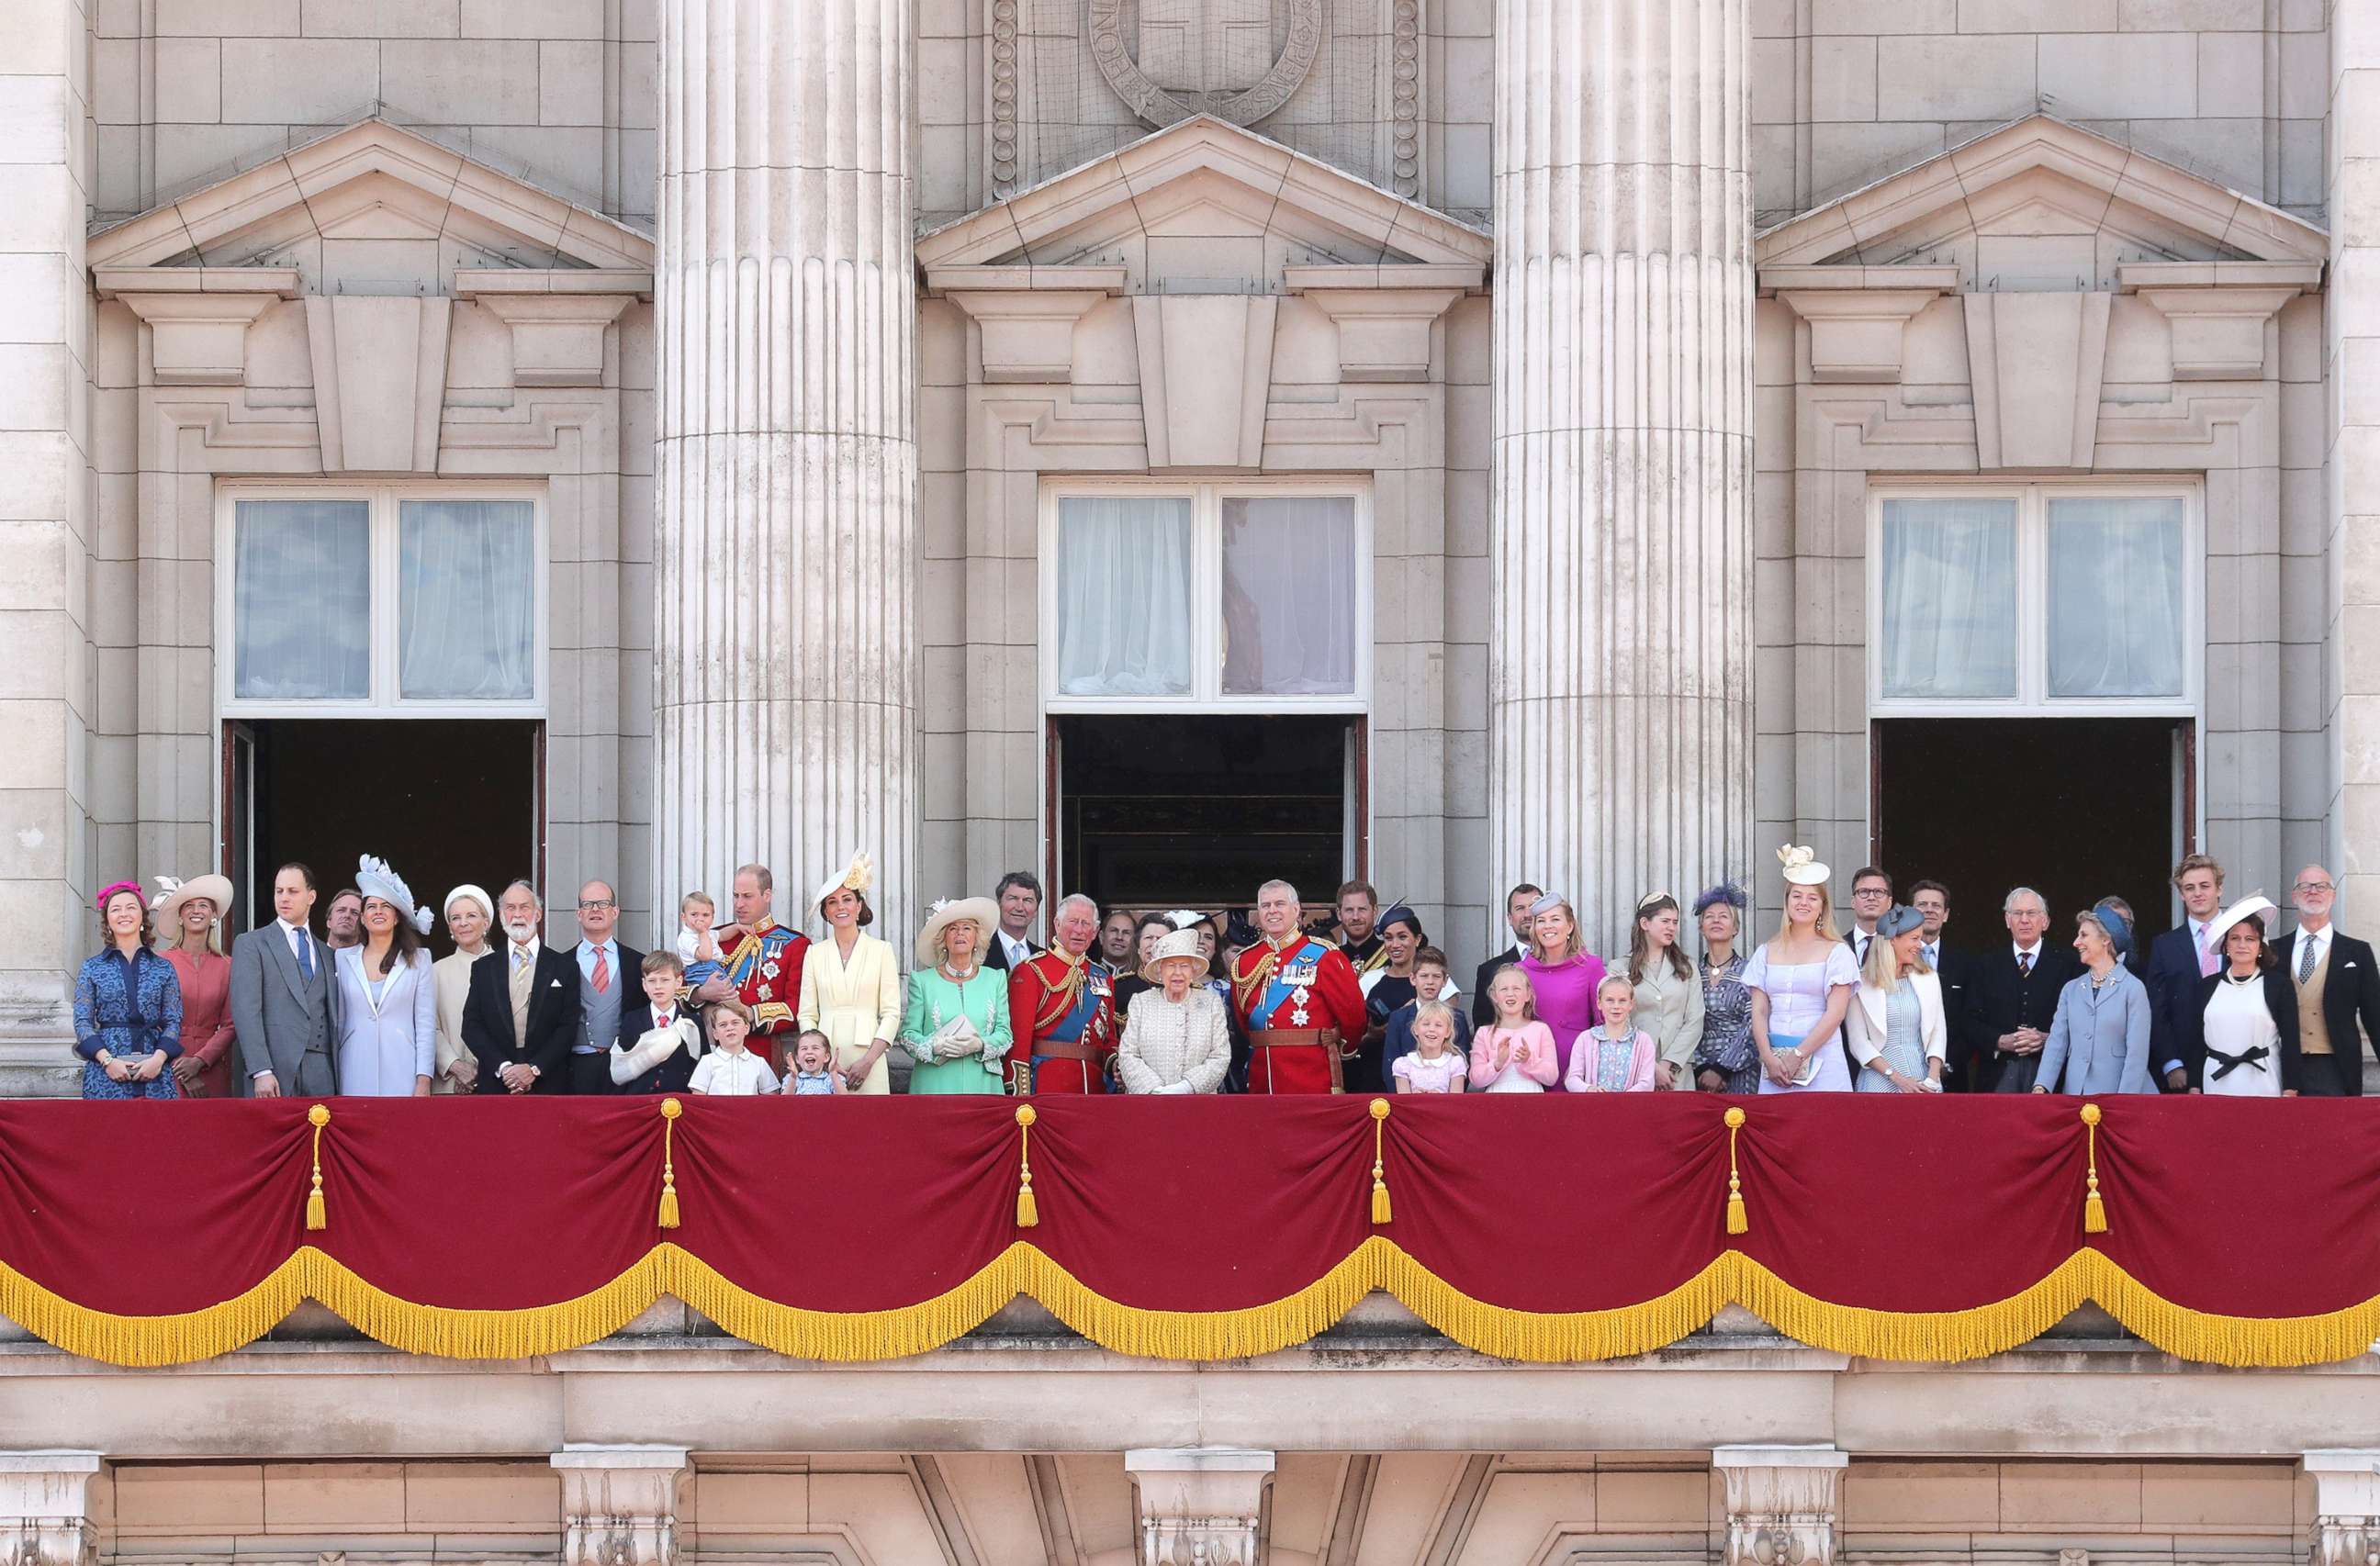 PHOTO: Members of the Royal Family stand on the balcony of Buckingham Palace to watch a fly-past of aircraft by the Royal Air Force during Trooping The Colour, the Queen's annual birthday parade, on June 08, 2019, in London.